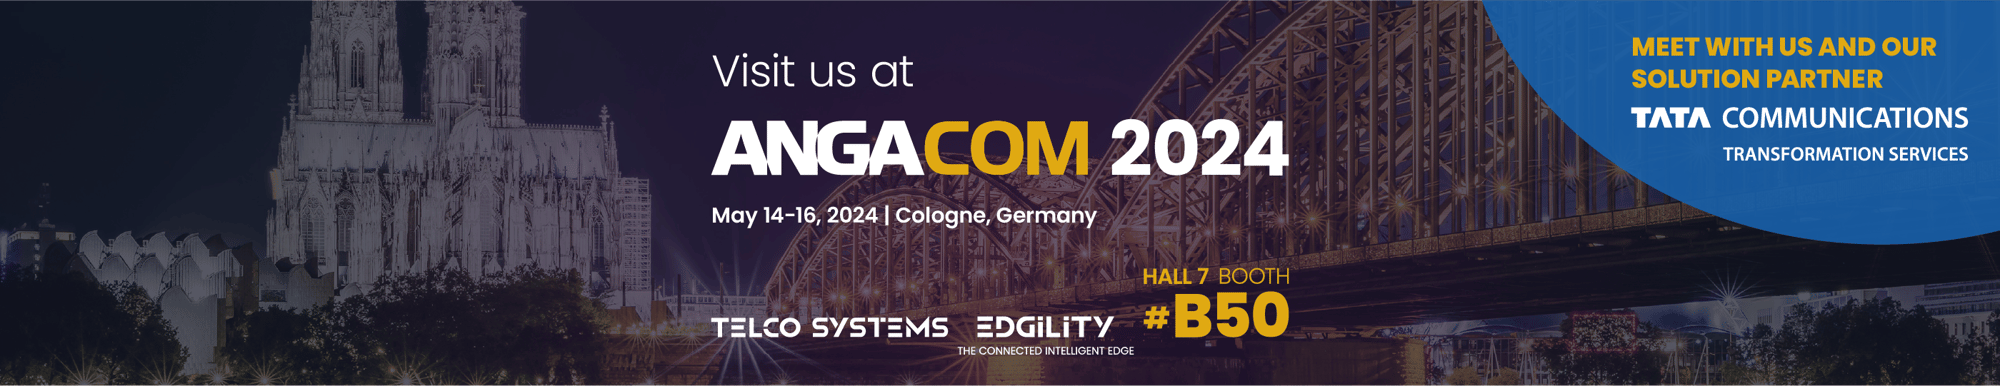 Visit us at ANGA COM 2024 | Telco Systems | Edgility by Telco